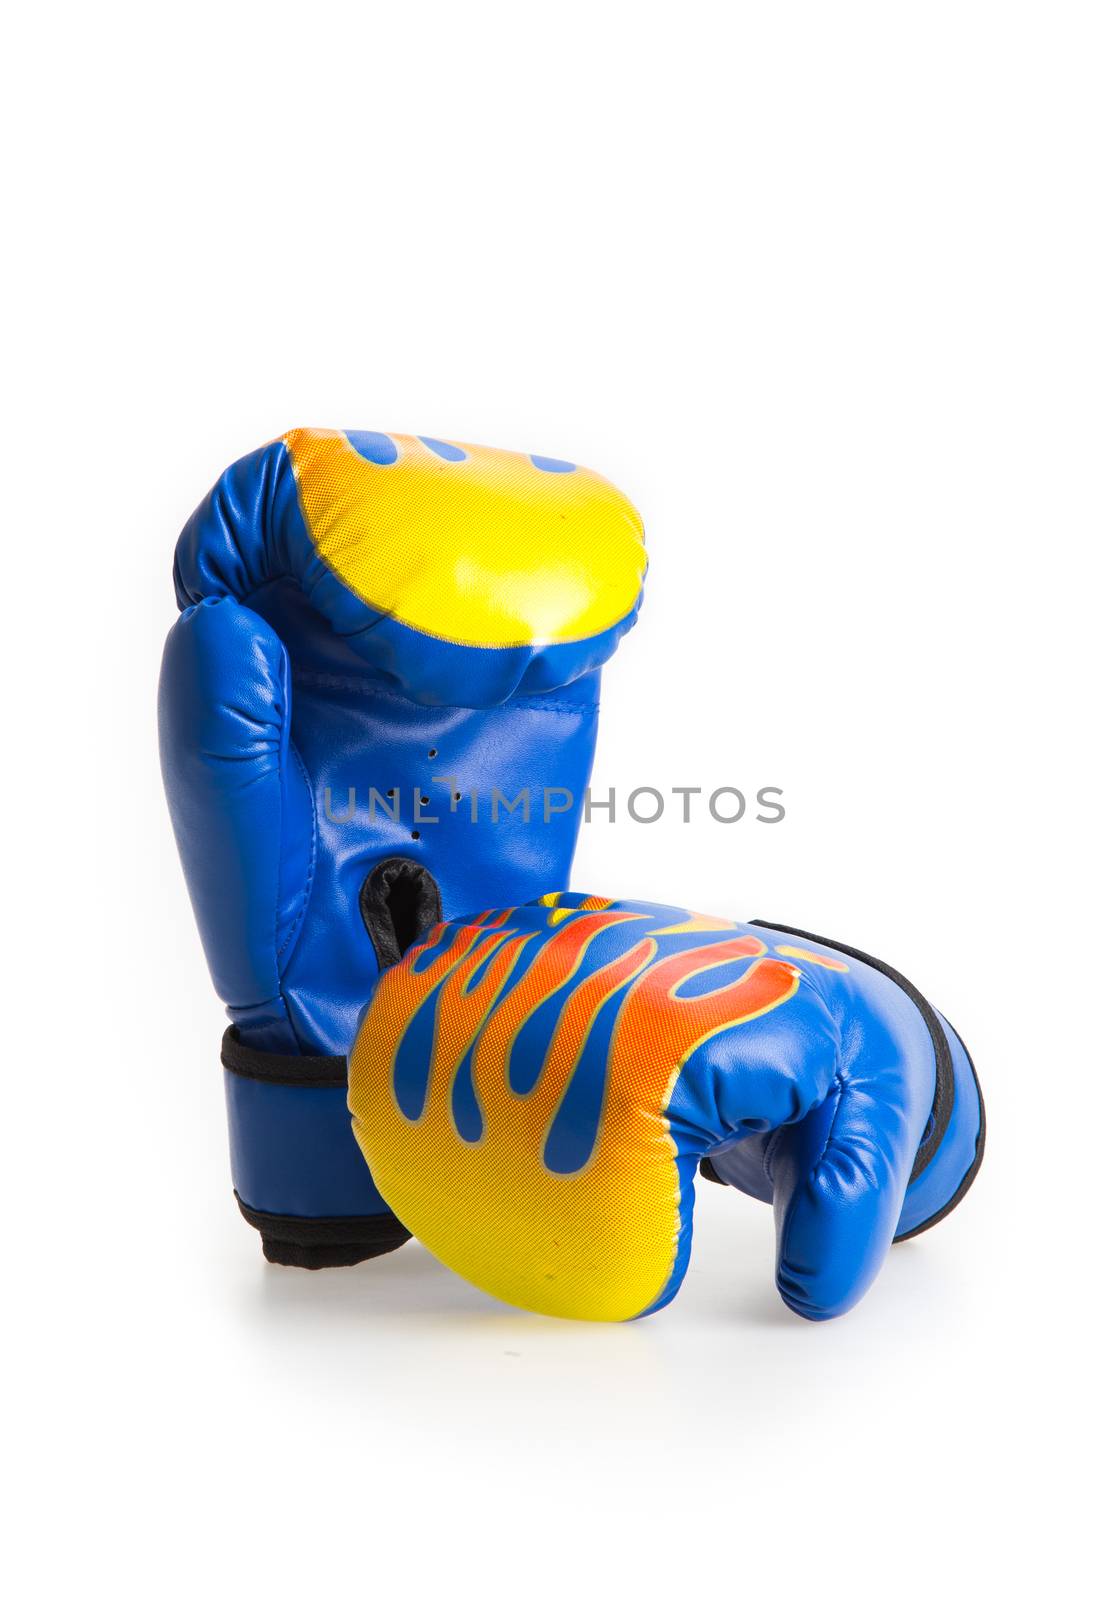 Pair of boxing glove  by tehcheesiong